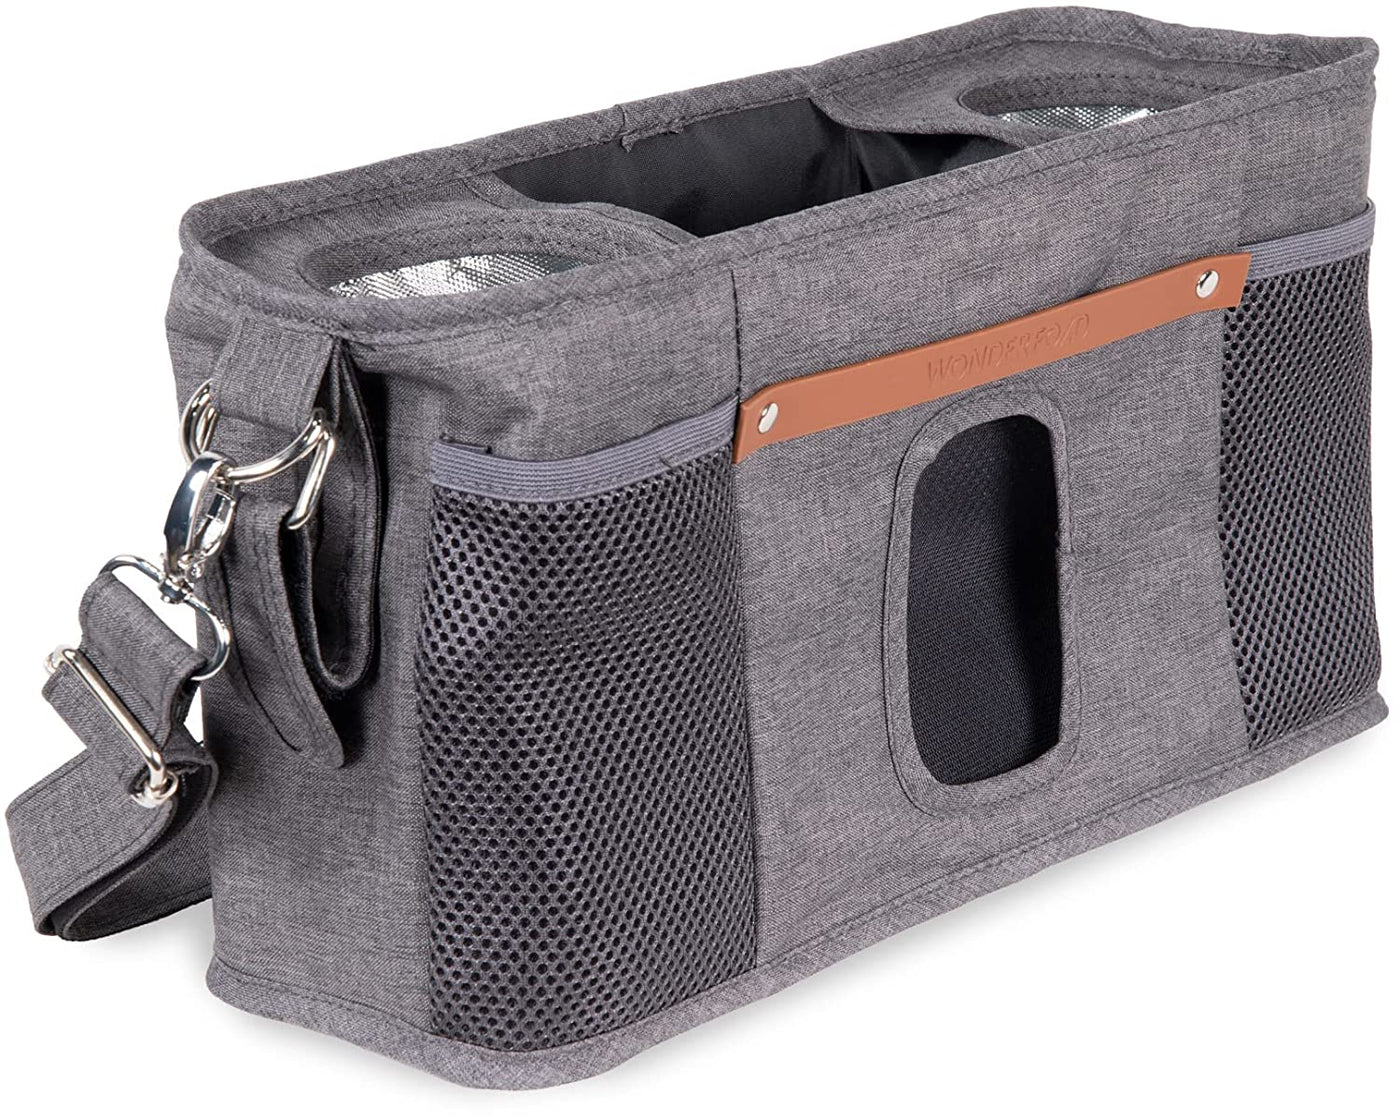 Parent Console with 2 Insulated Cup Holders